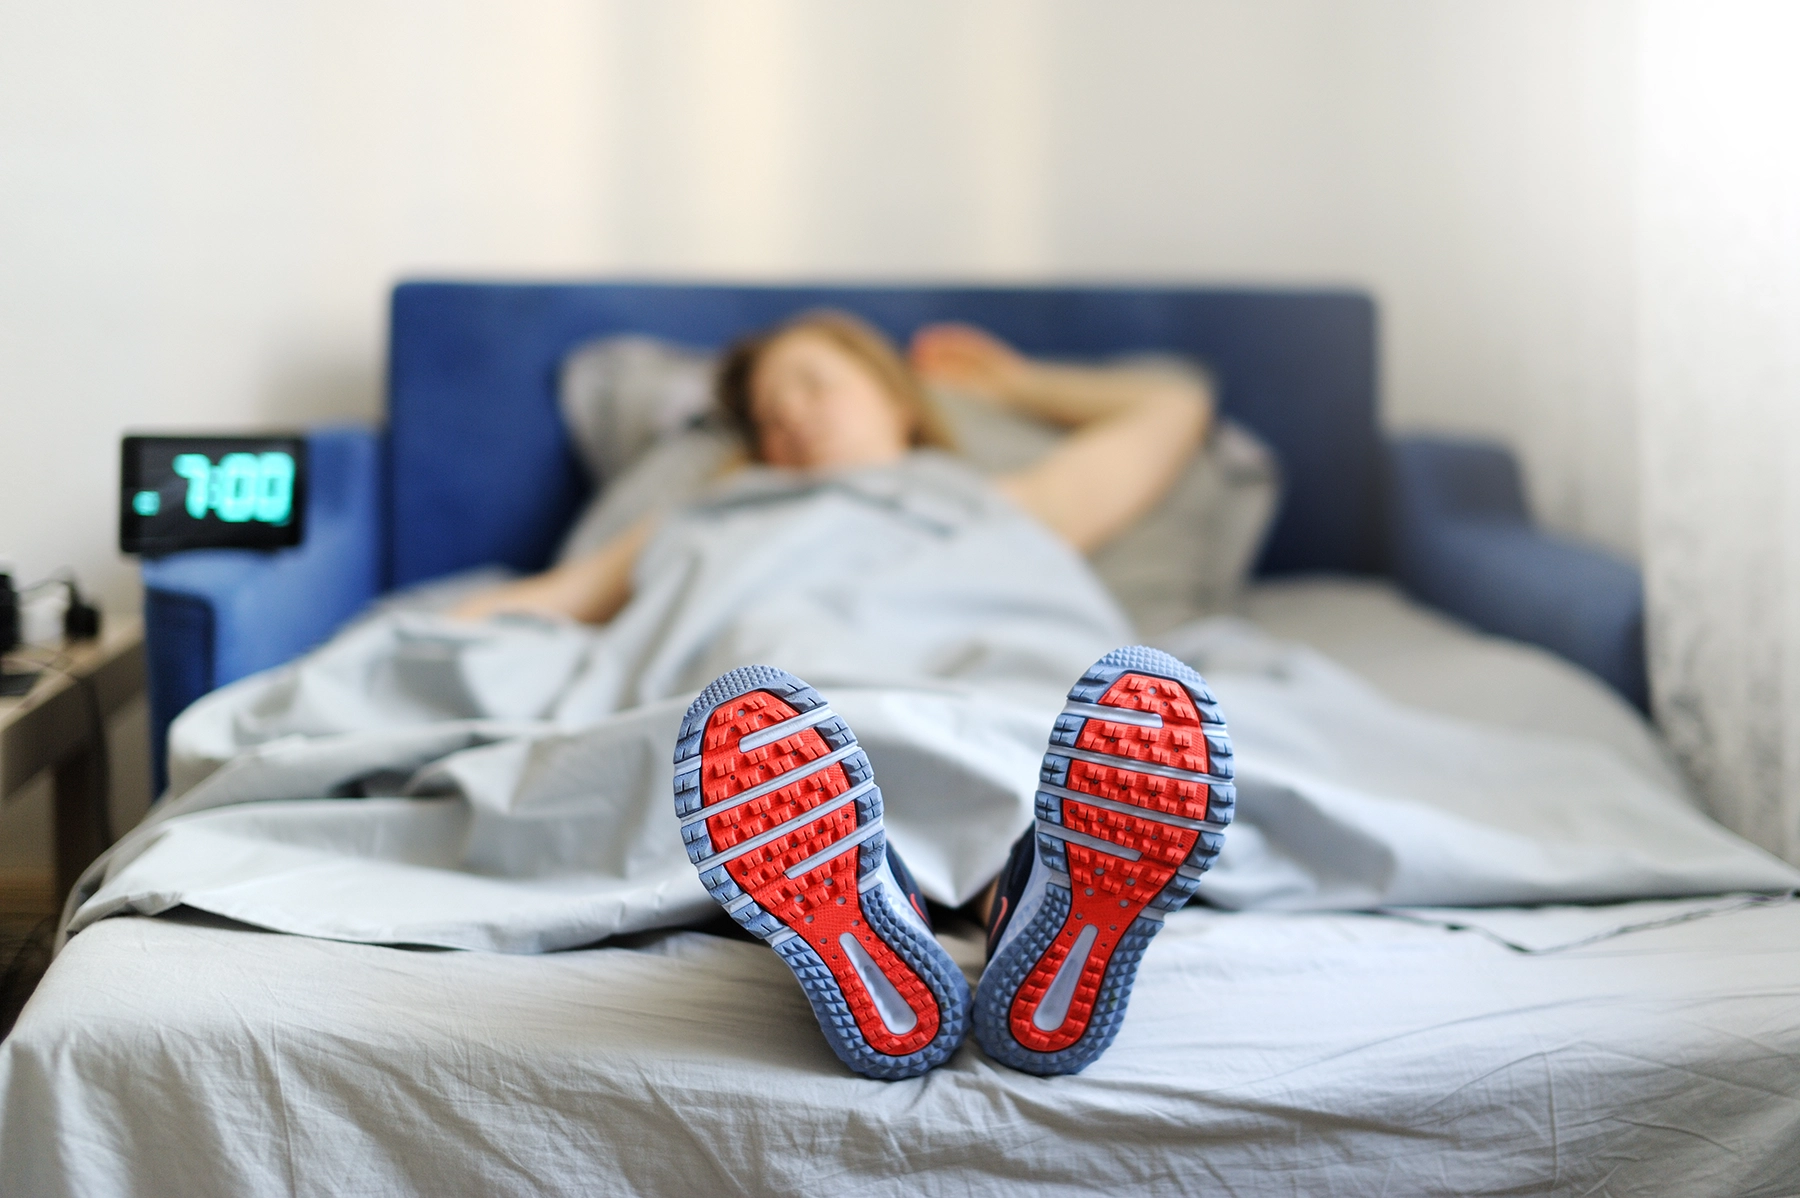 Woman in running shoes lies in bed prepping herself to get up. Clock shows 7am.